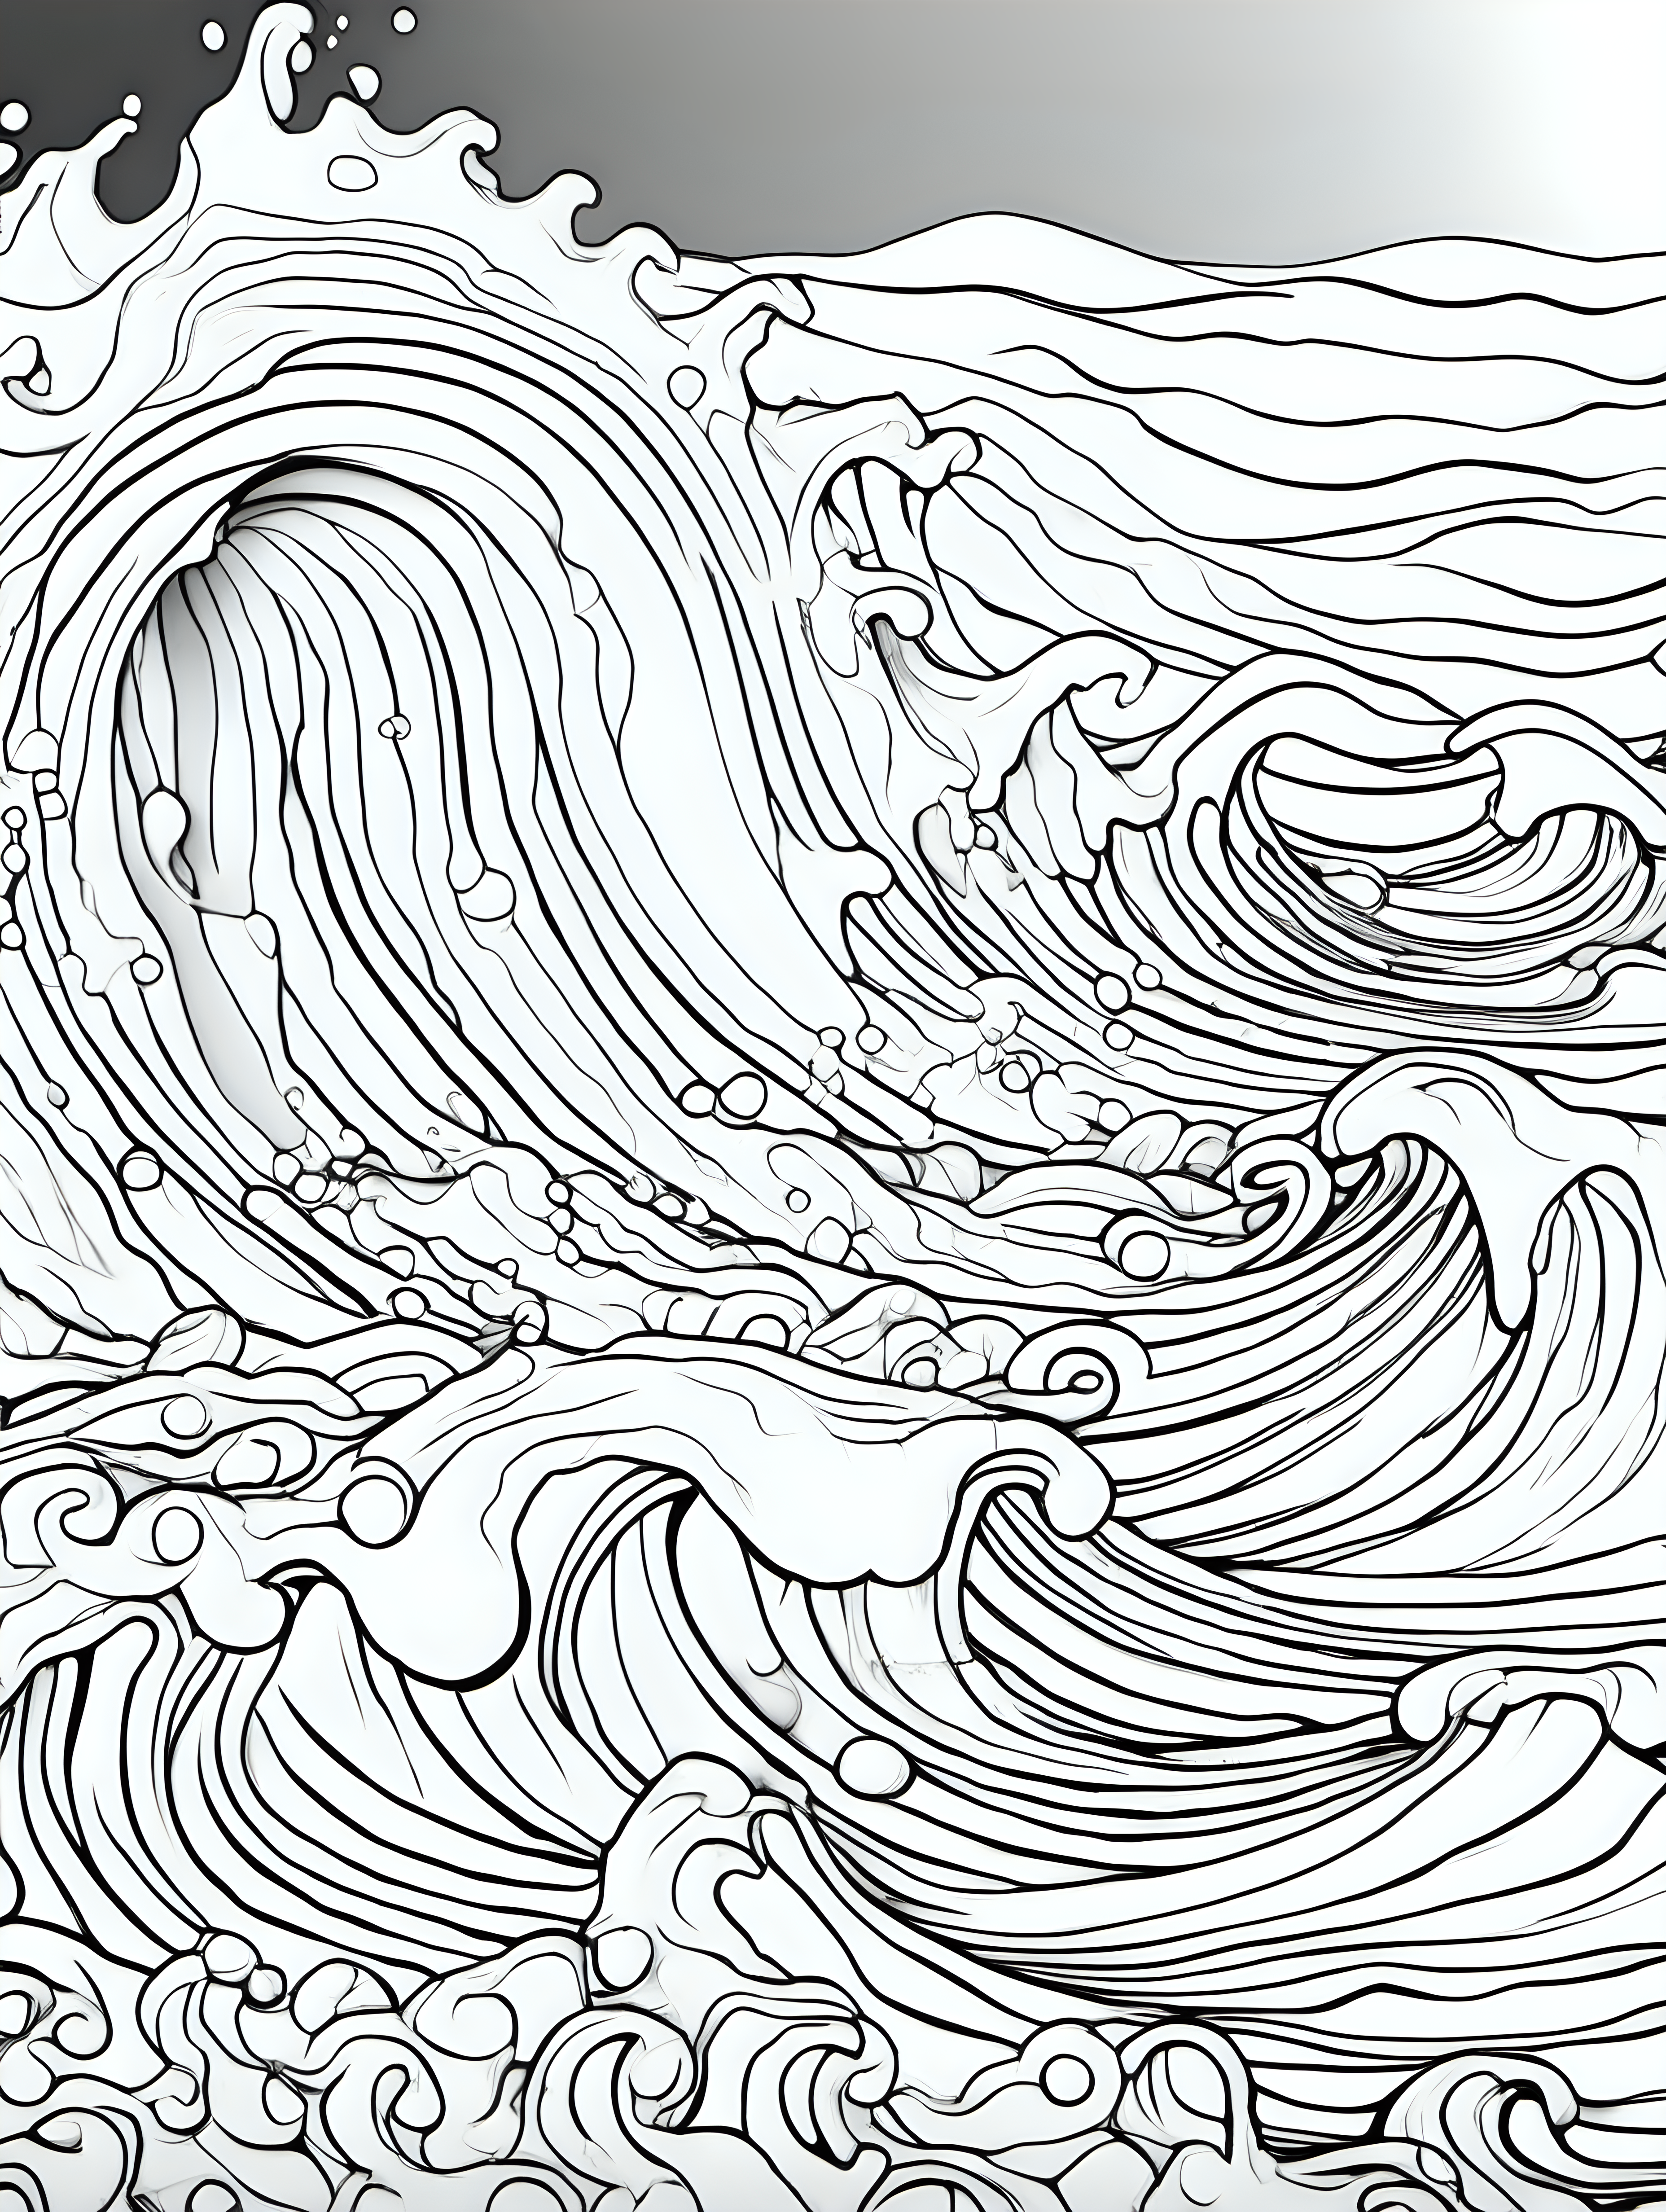 ocean waves, paint pouring cells, coloring page, no color